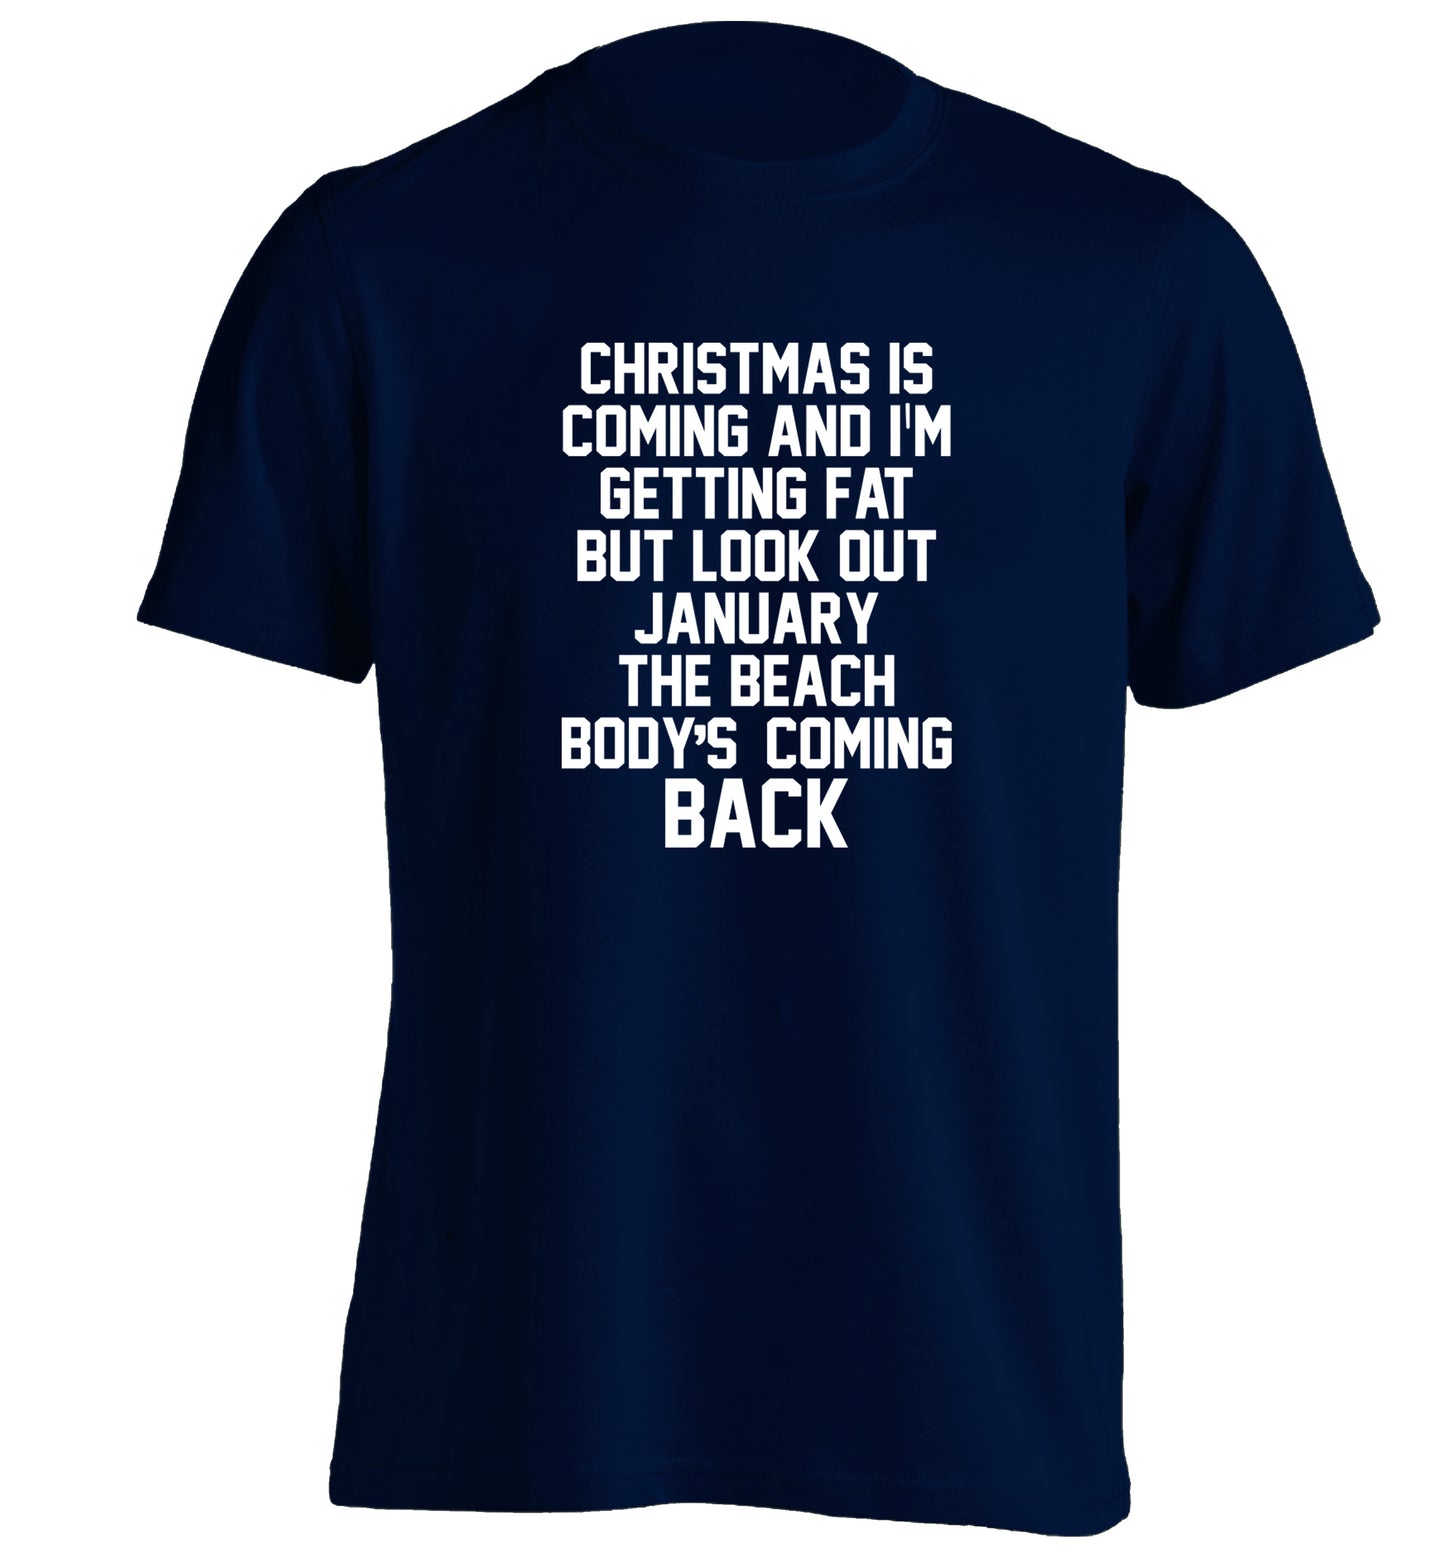 Christmas is coming and I'm getting fat but look out January the beach body's coming back! adults unisex navy Tshirt 2XL